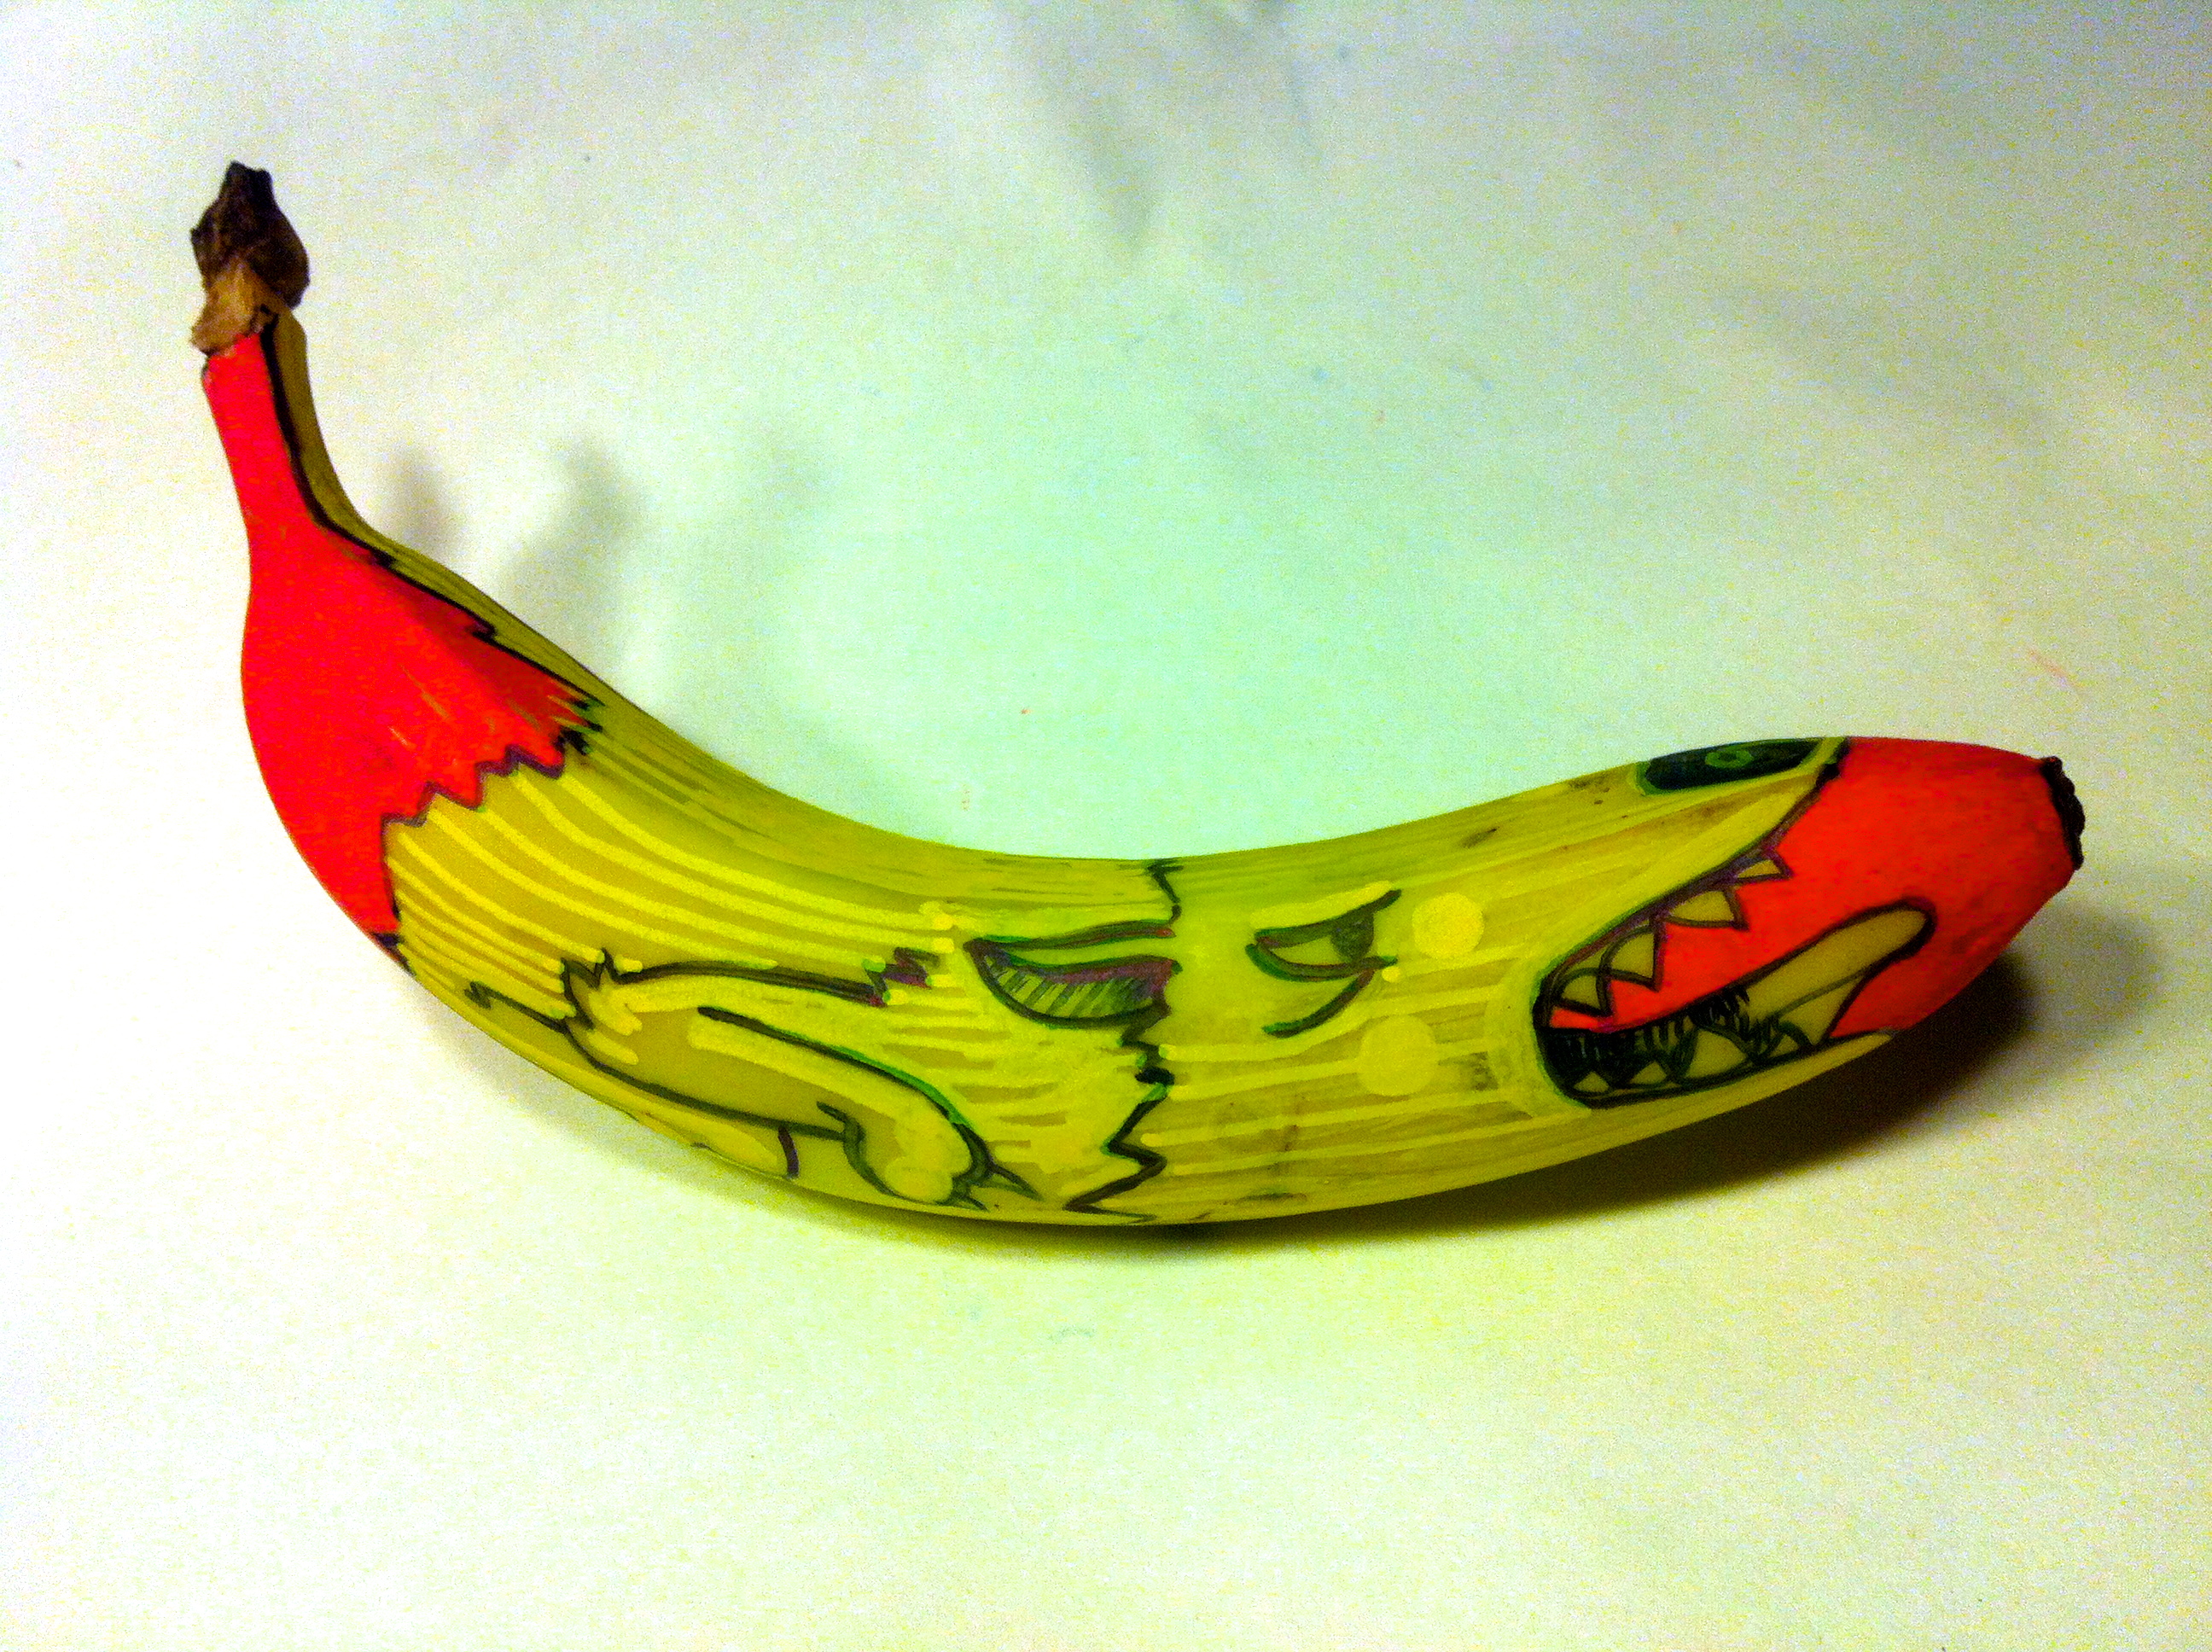 Painted banana, a dog monster sticks it's tongue out on a red background. 